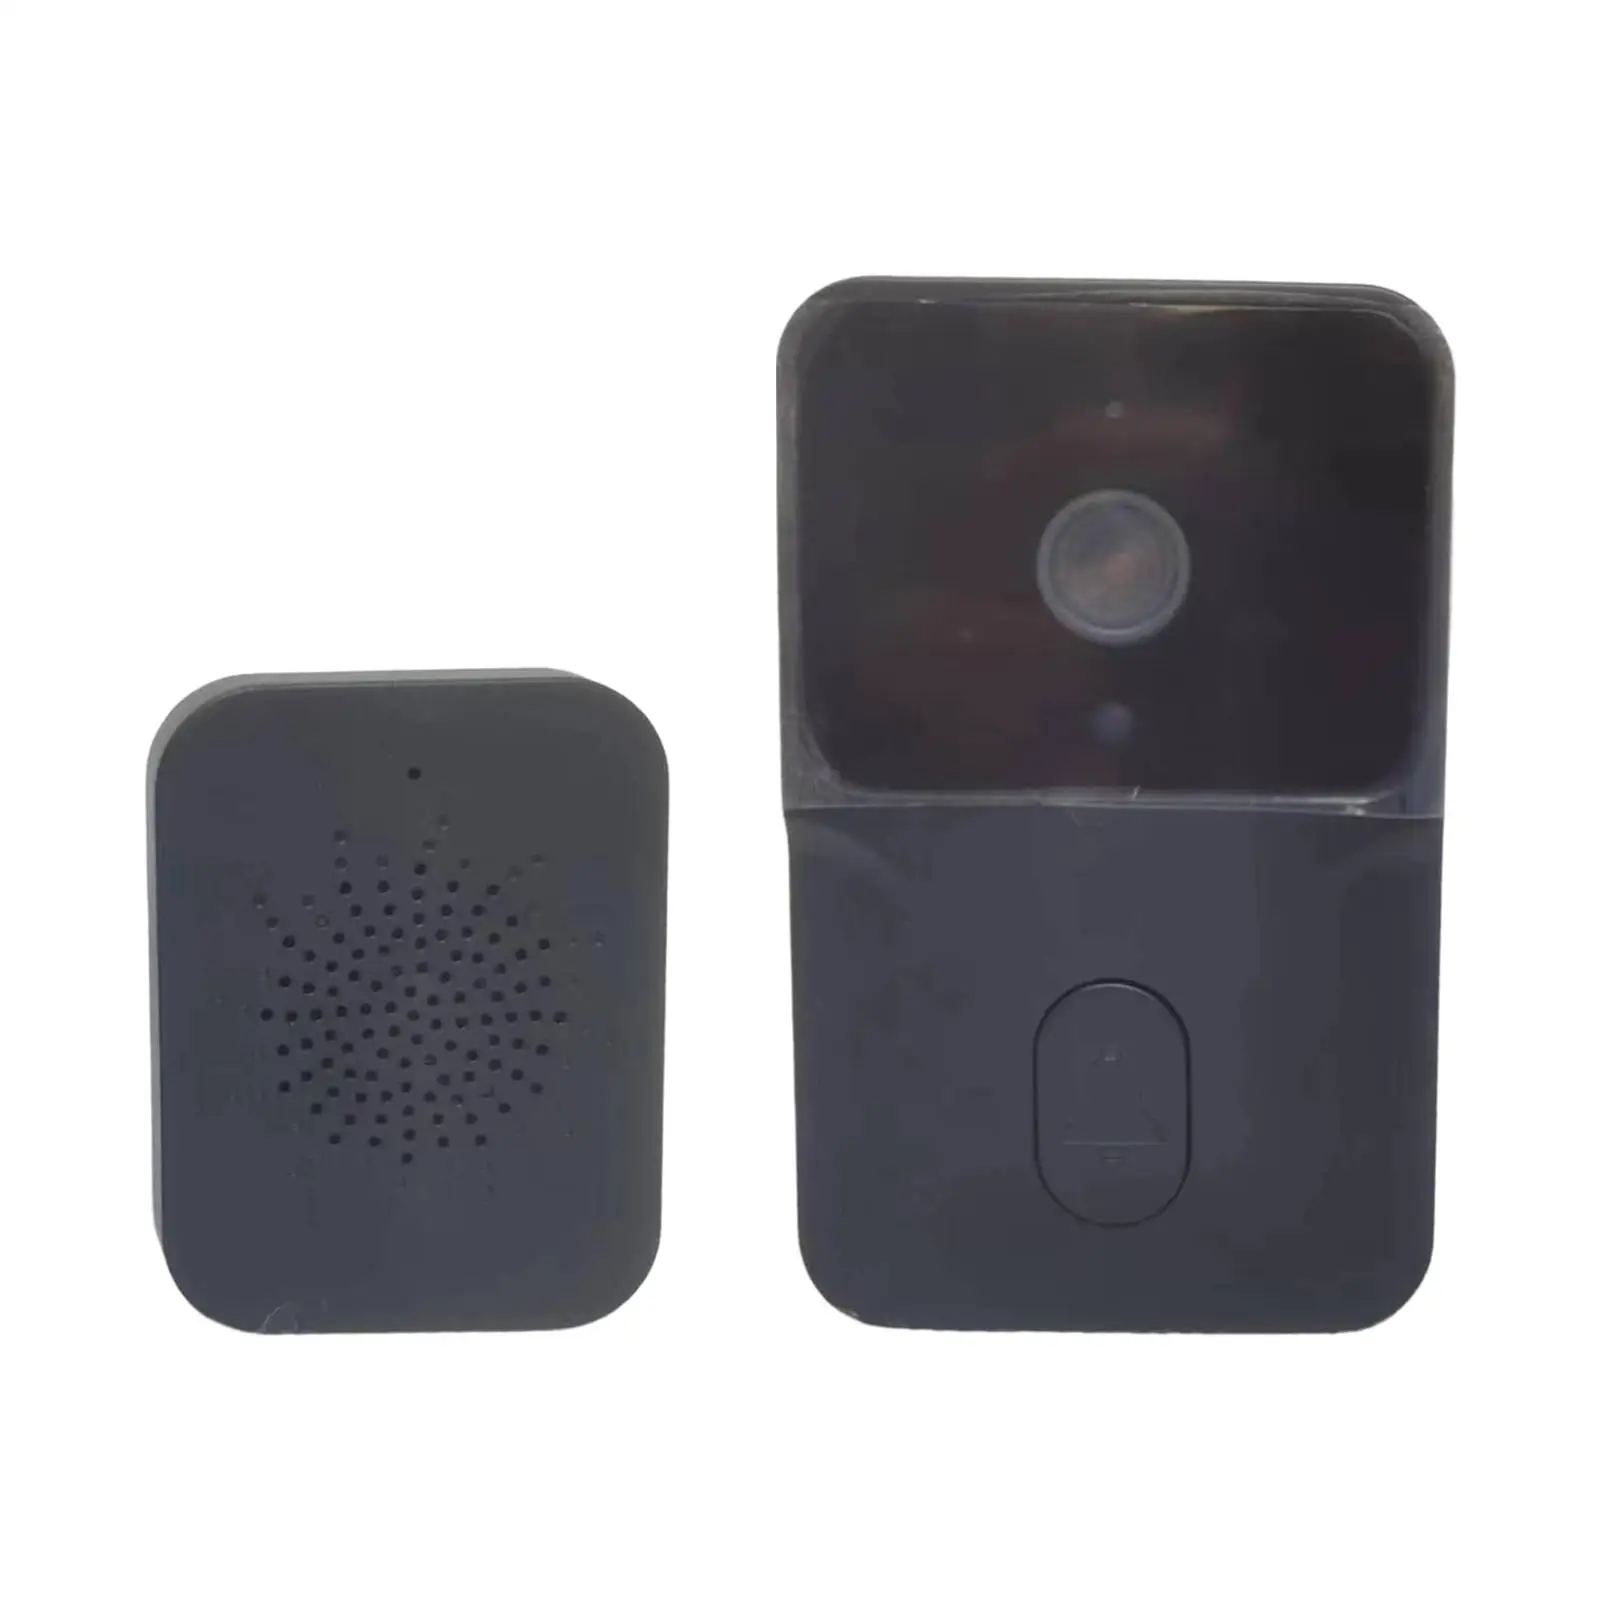 Doorbell Camera Wireless Easy Install Motion Detection WiFi Video Doorbell for Classroom Businesses Office Playhouse Home